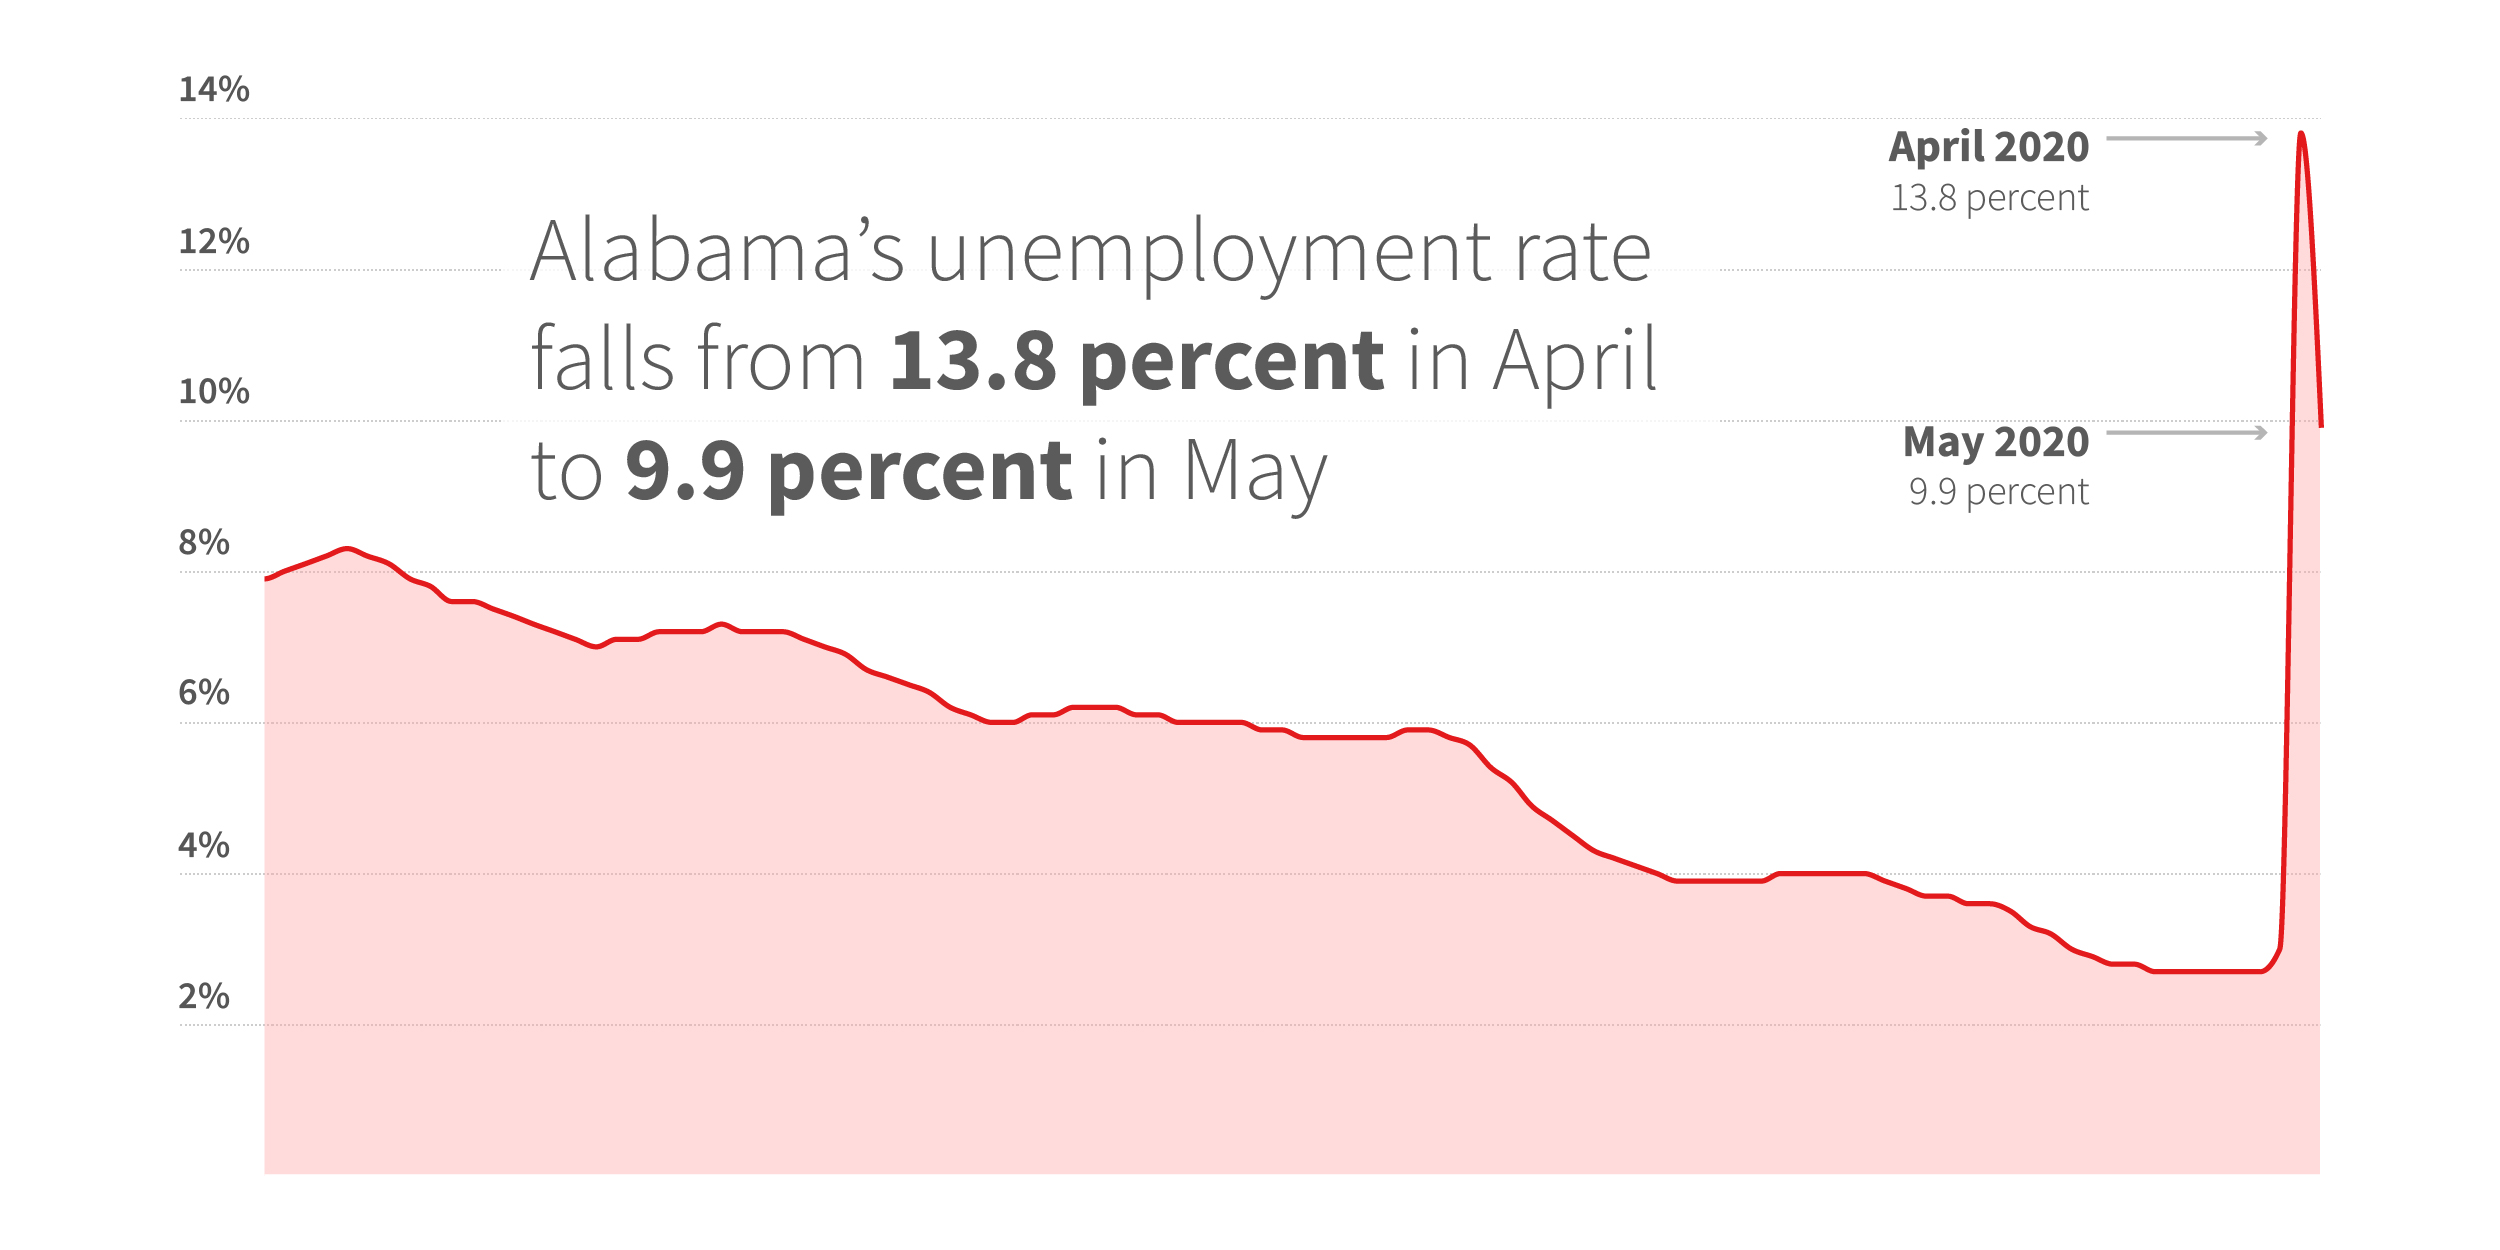 Alabama's unemployment rate falls to 9.9 percent